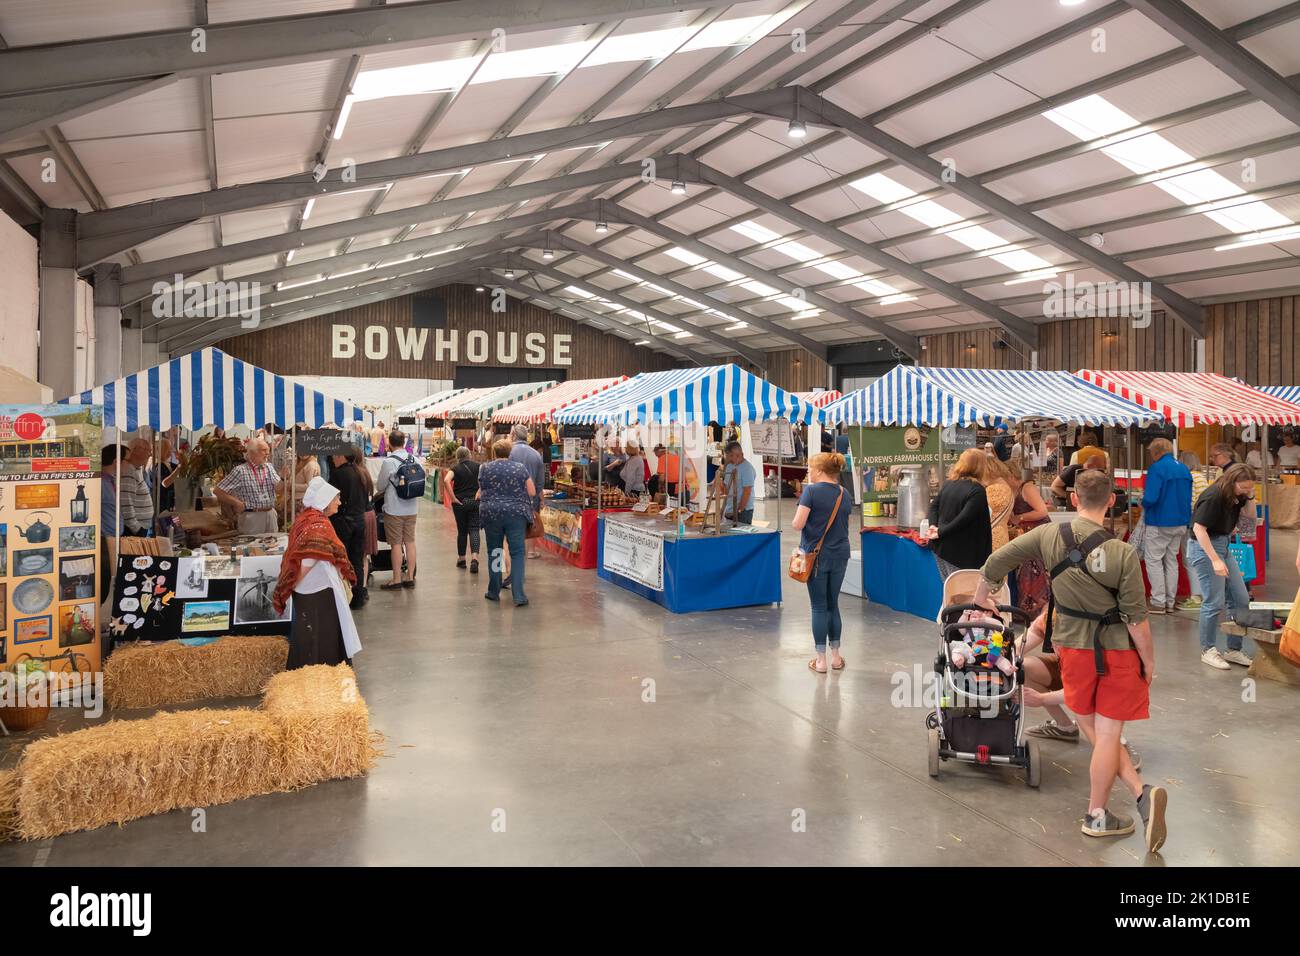 East Neuk, UK - August 14, 2022: Shoppers visit market stalls inside a barn at the rural country Bowhouse Farmer's Market at East Neuk in Fife, Scotla Stock Photo